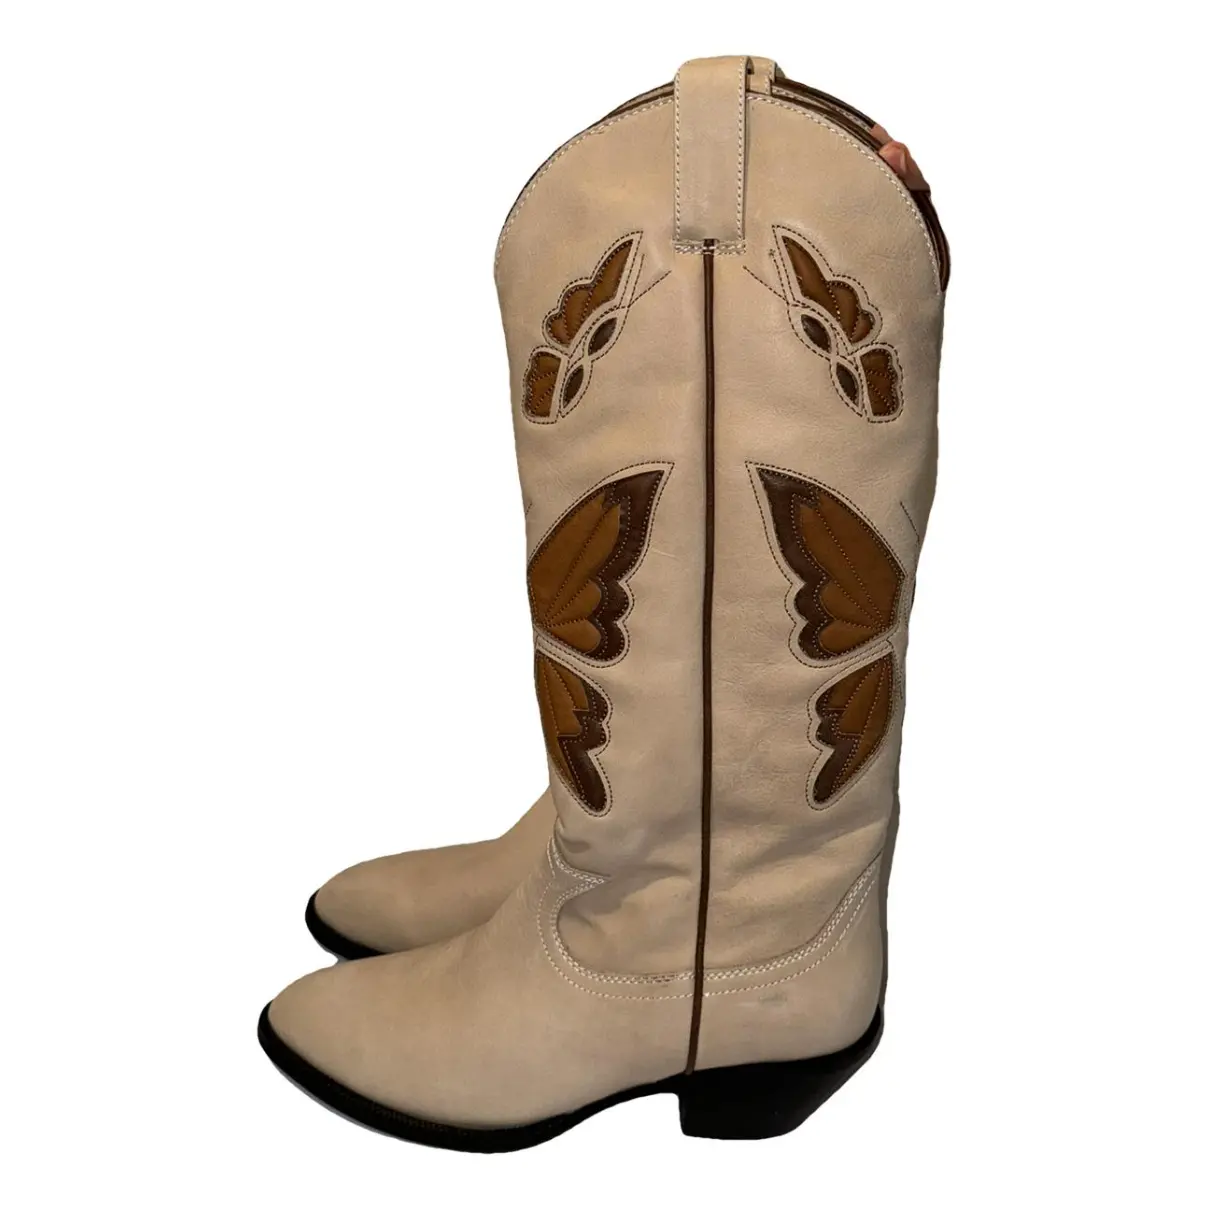 Leather western boots